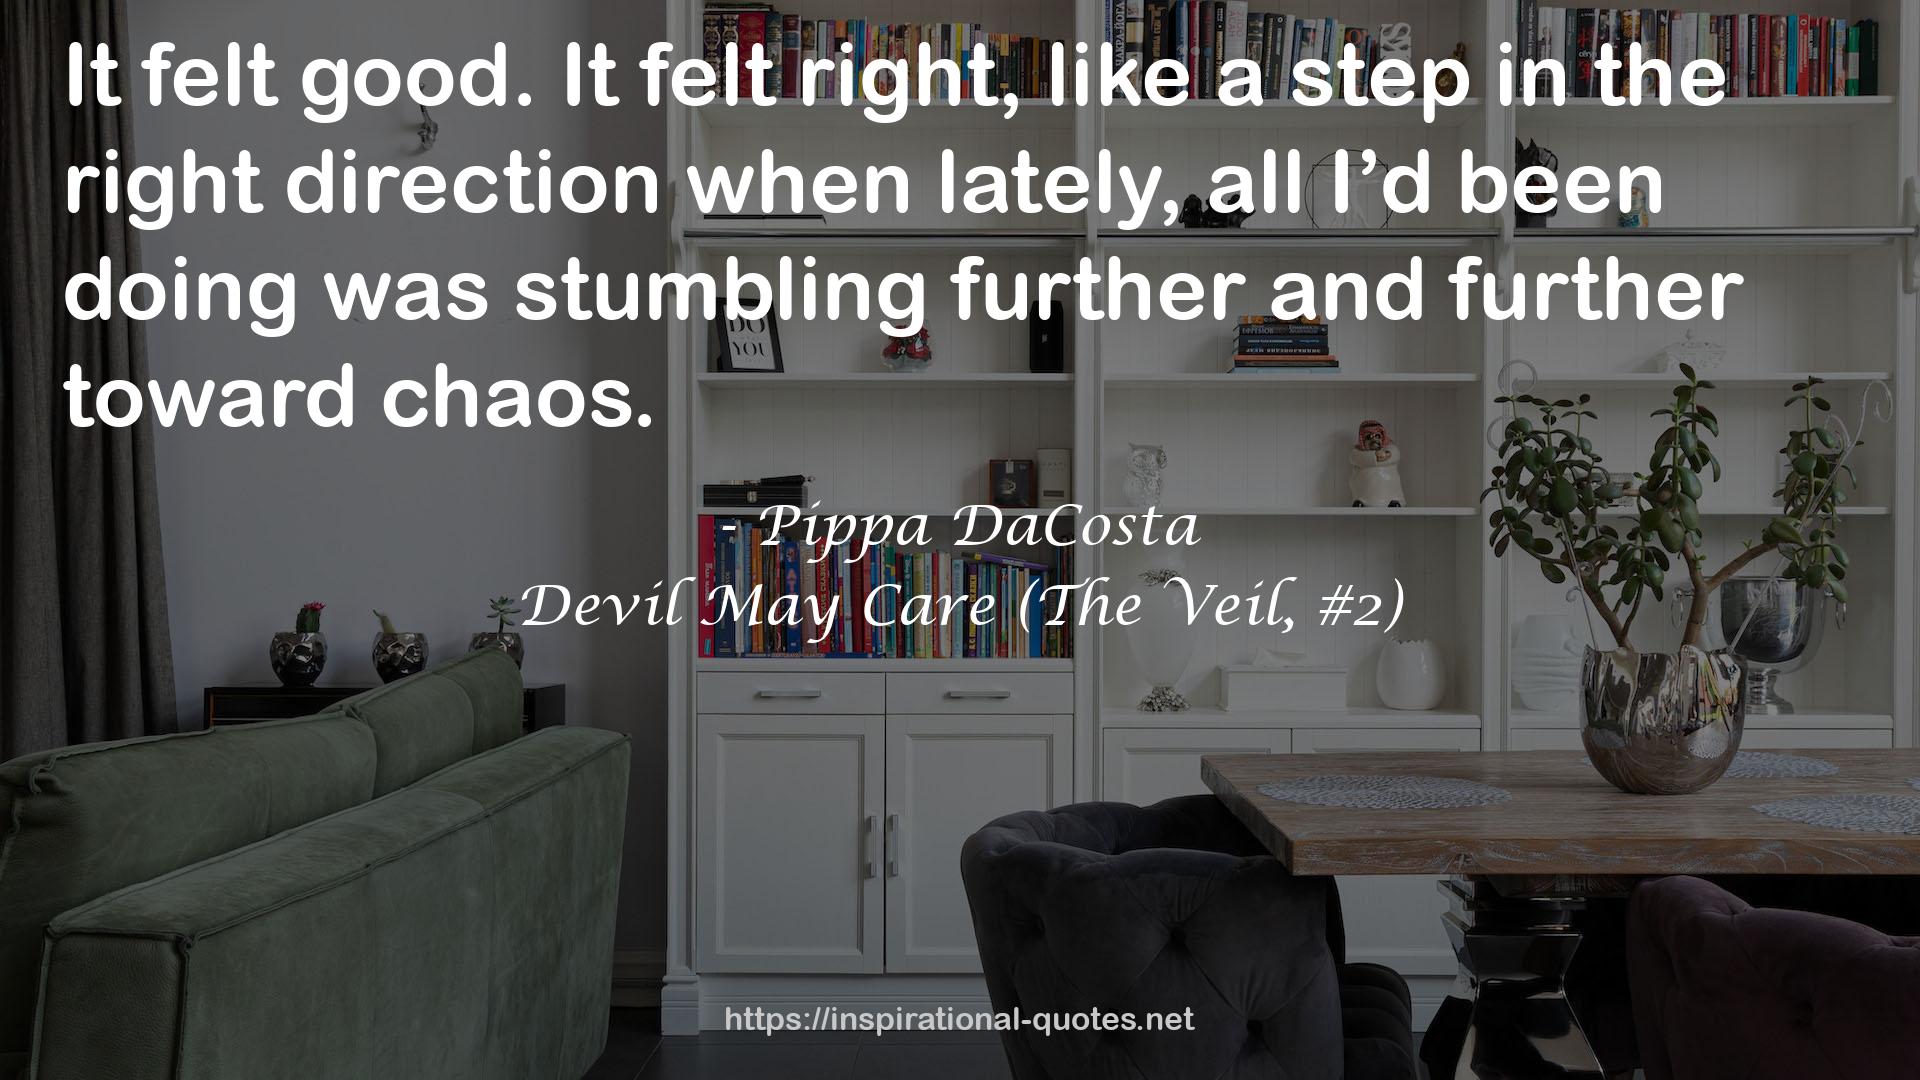 Devil May Care (The Veil, #2) QUOTES